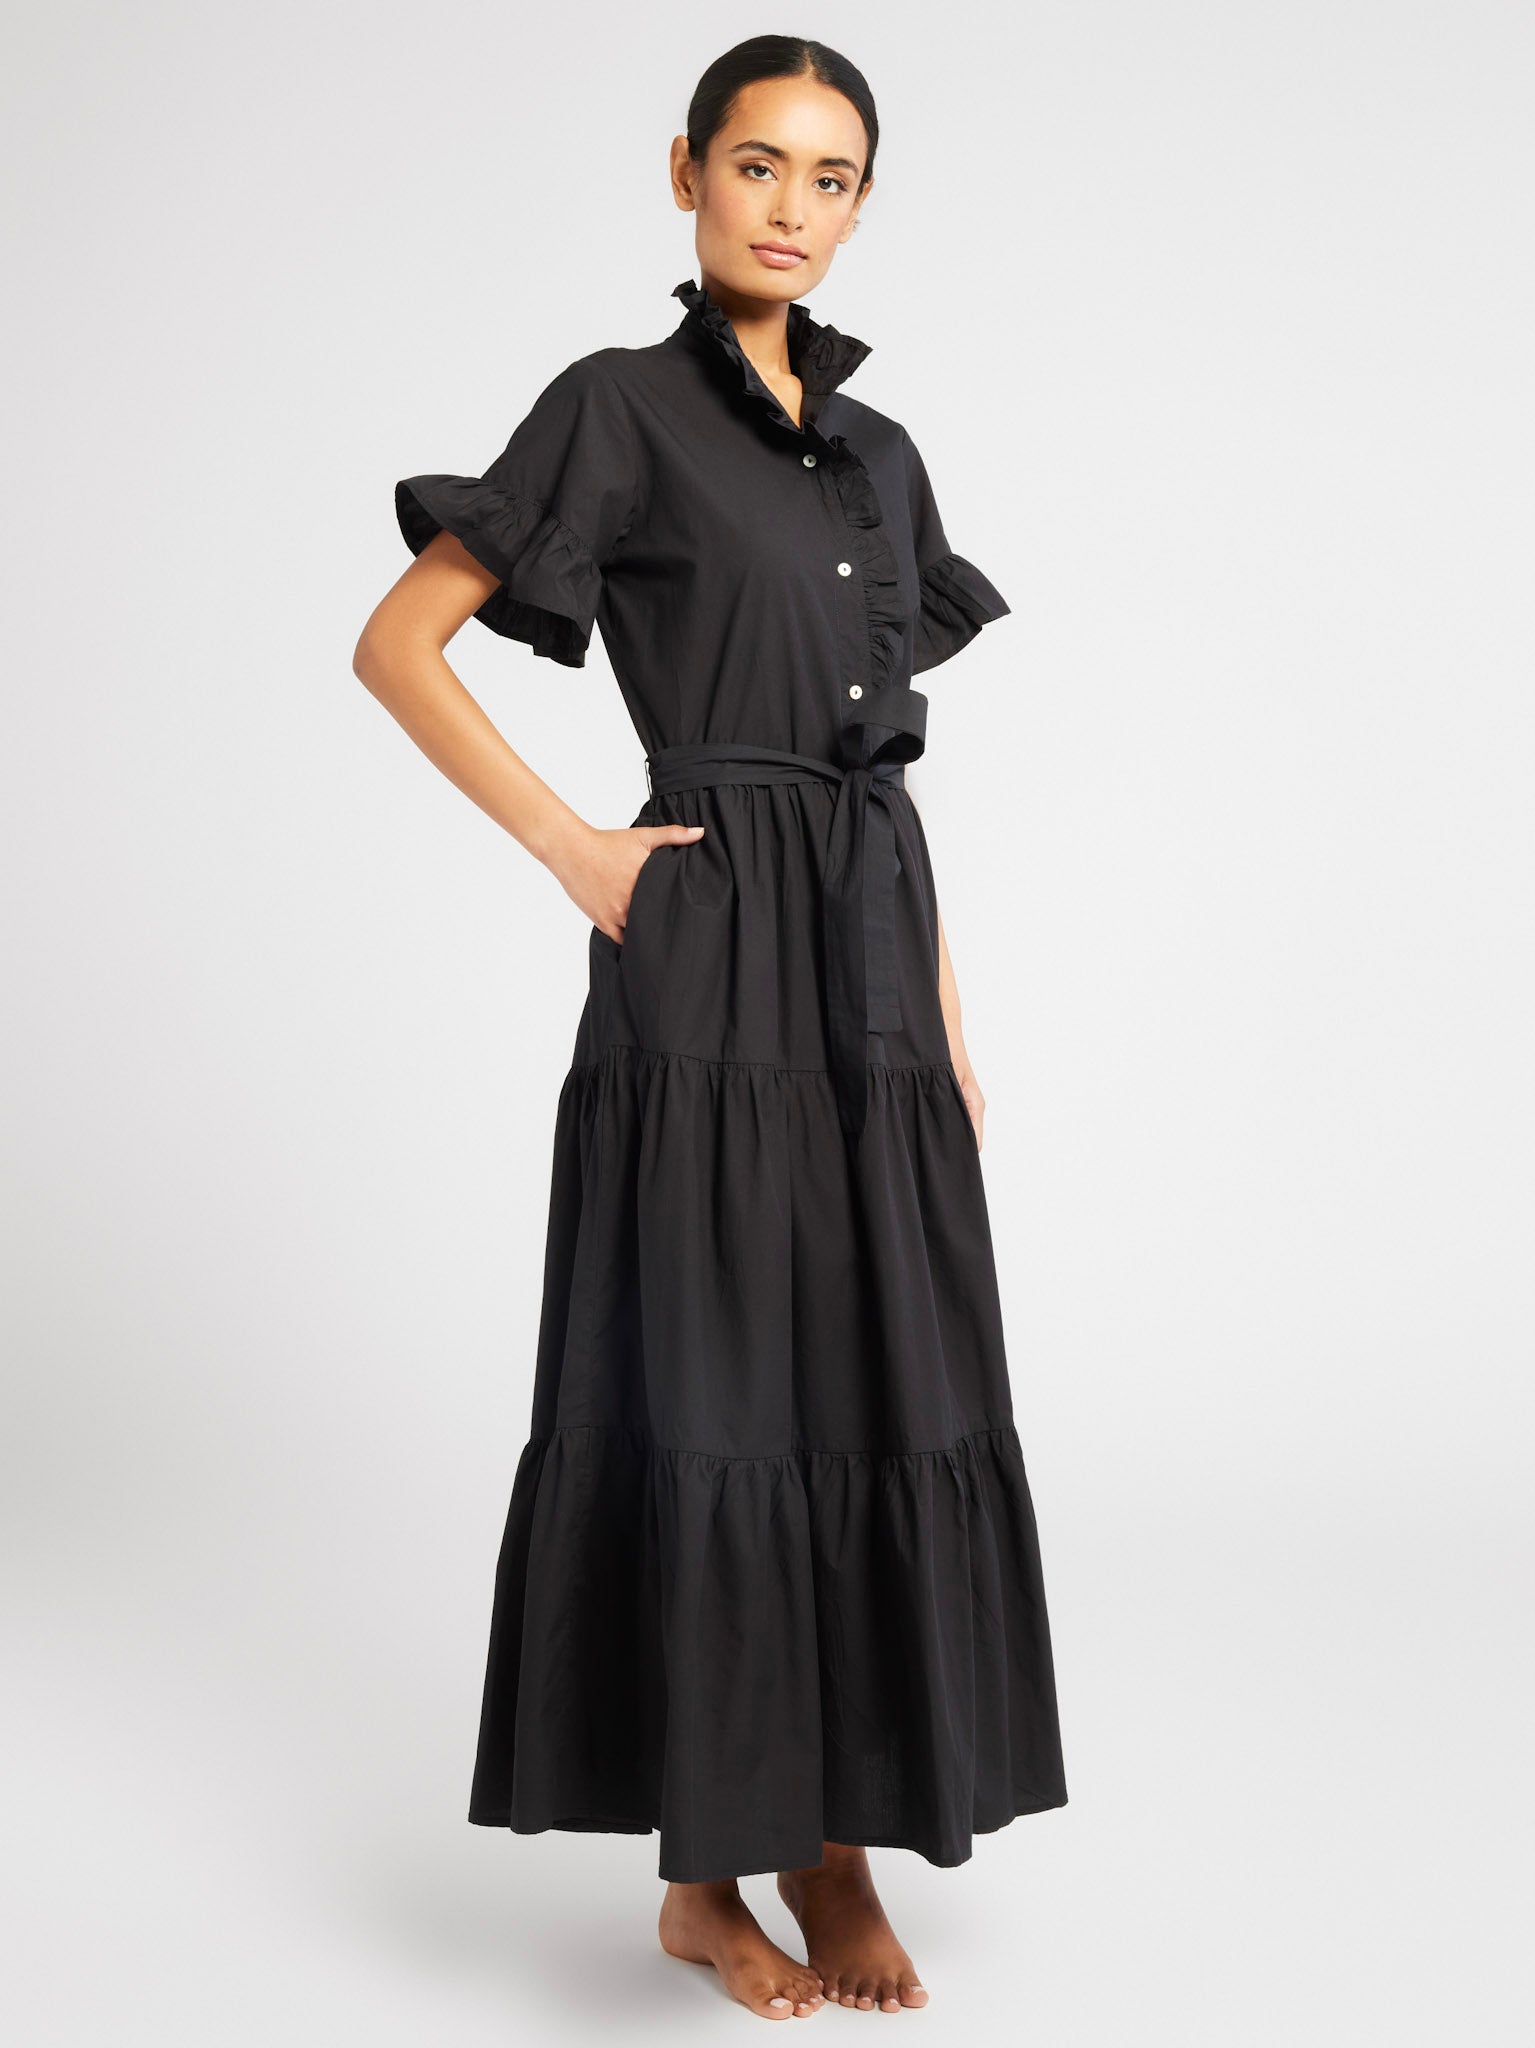 MILLE Clothing Victoria Dress in Black